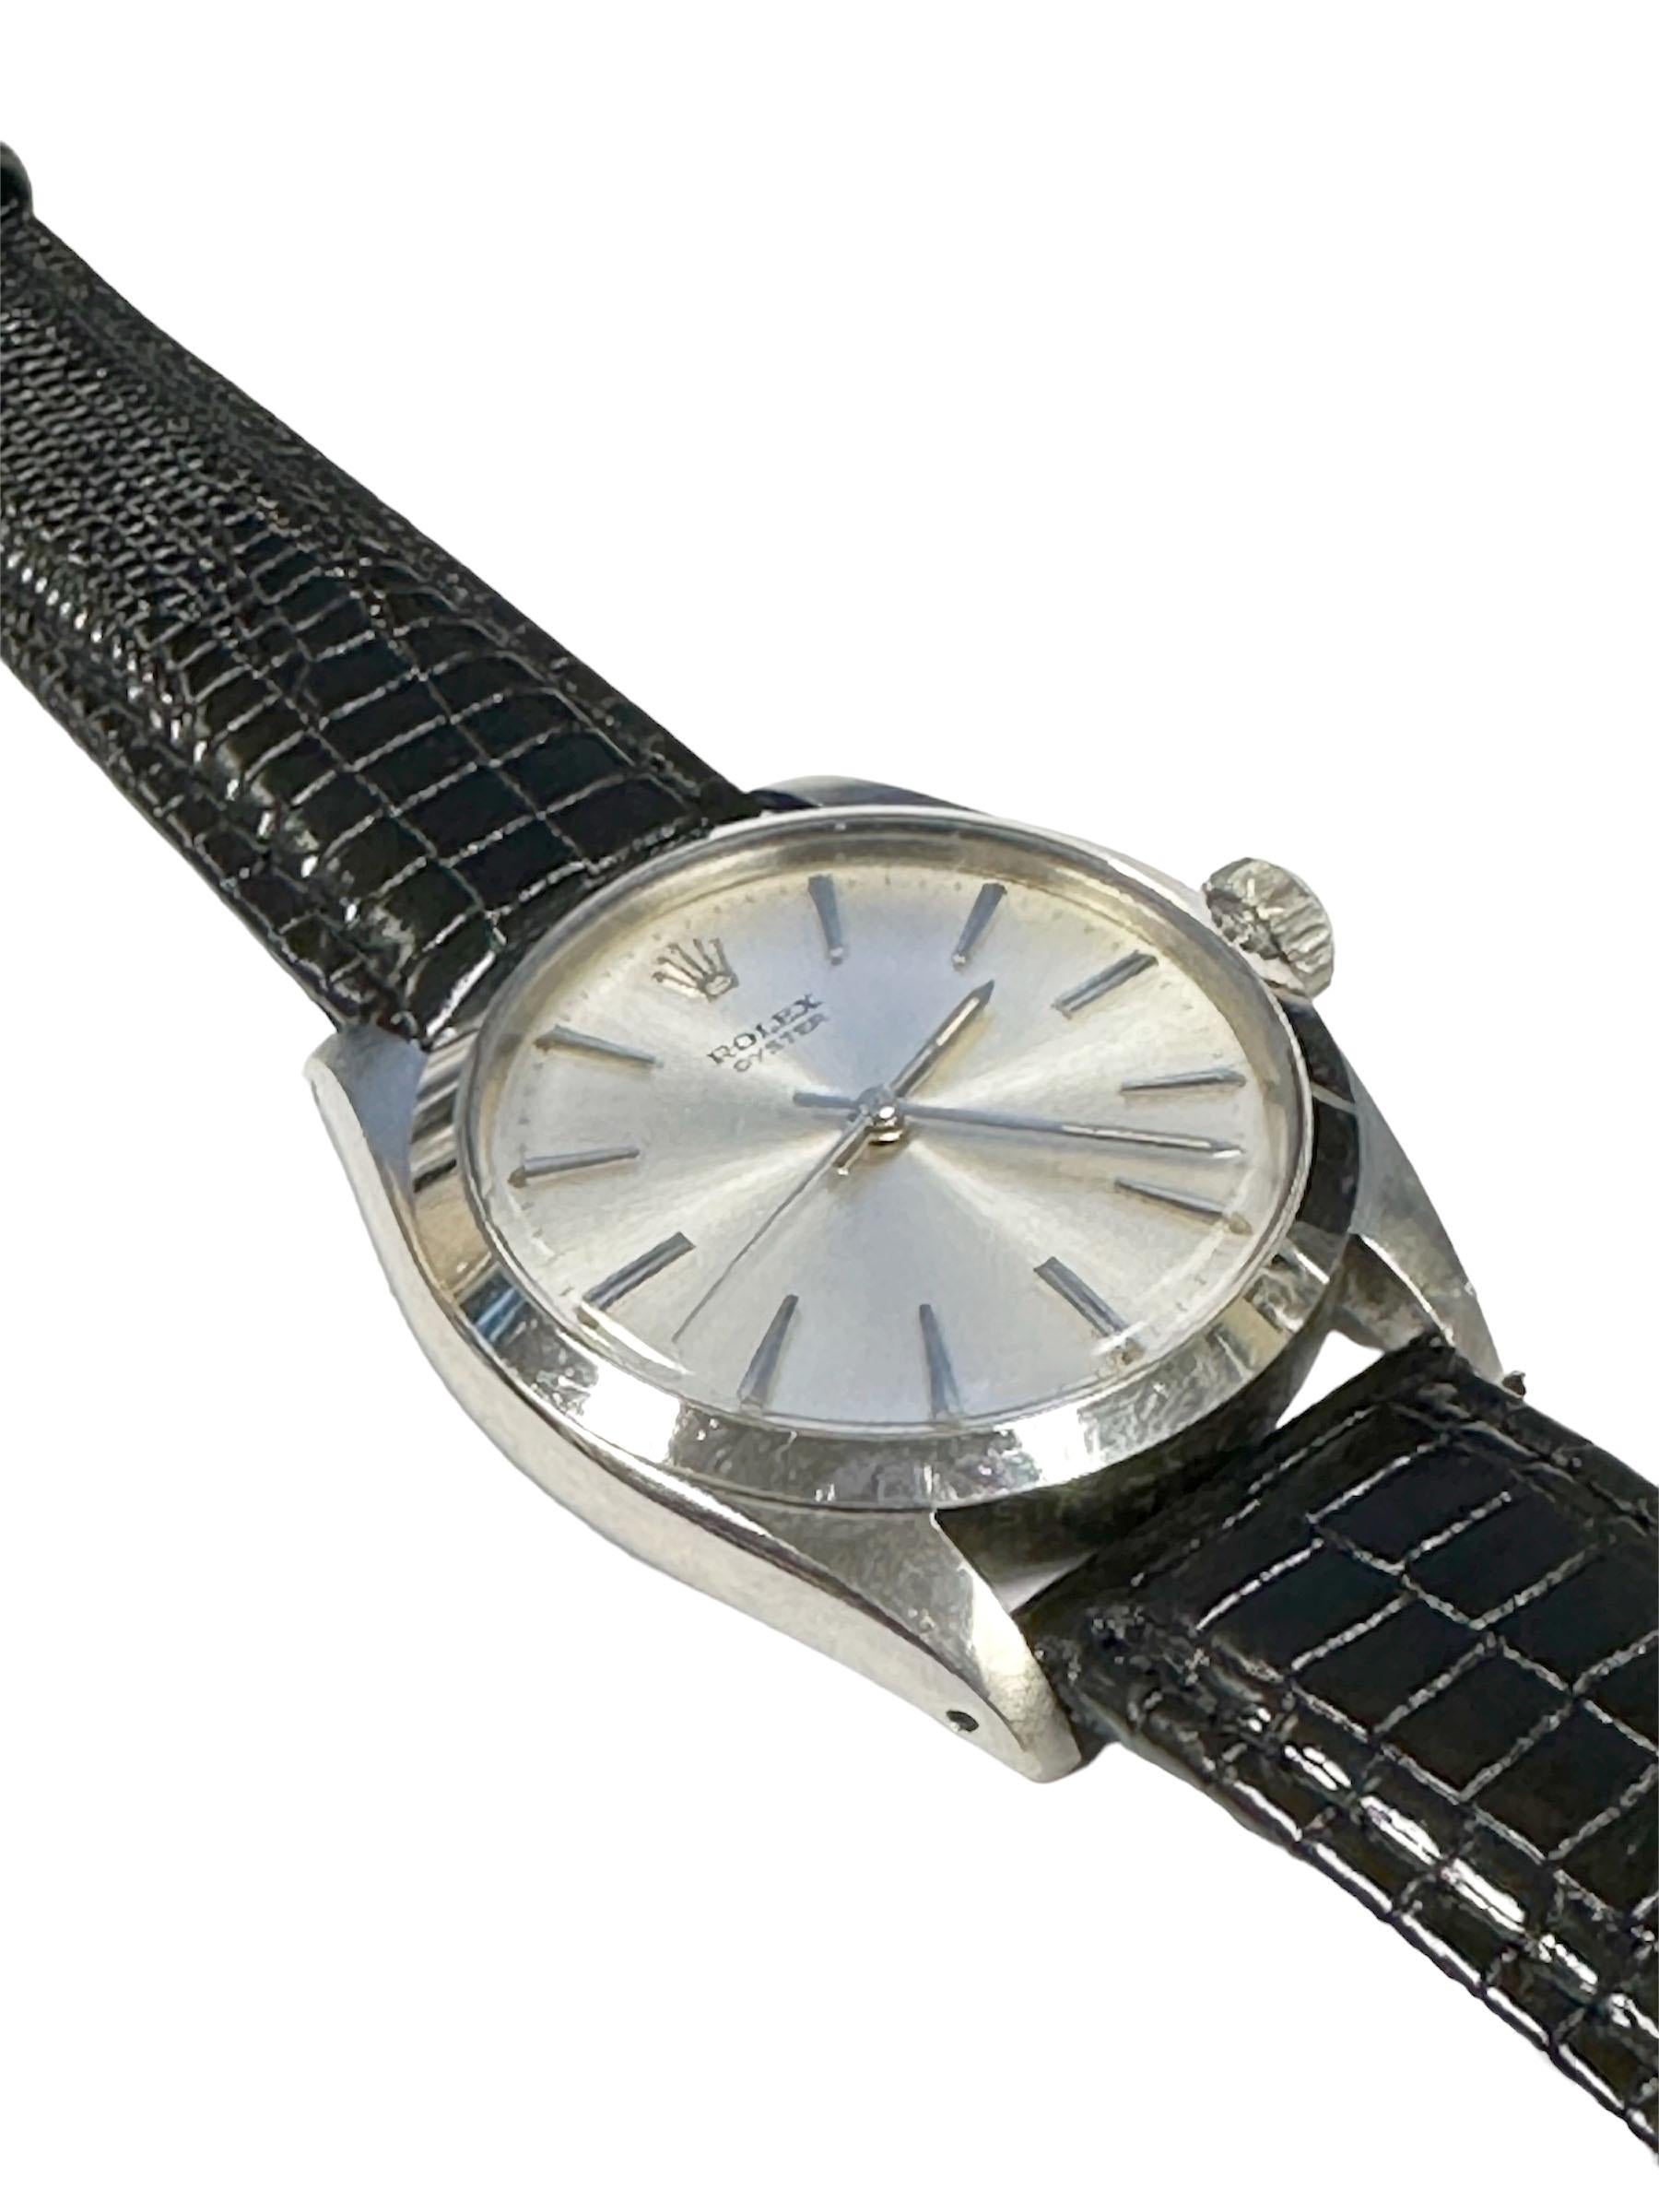 Circa 1959 Rolex Reference 6426 Wrist Watch, 34 M.M. Stainless Steel 3 Piece Oyster Case, 17 Jewel Caliber 1210 Manual Wind Nickle Lever Movement, Beautiful Original Mint Condition Silver Satin Dial with the shiny Rainbow effect, having Raised